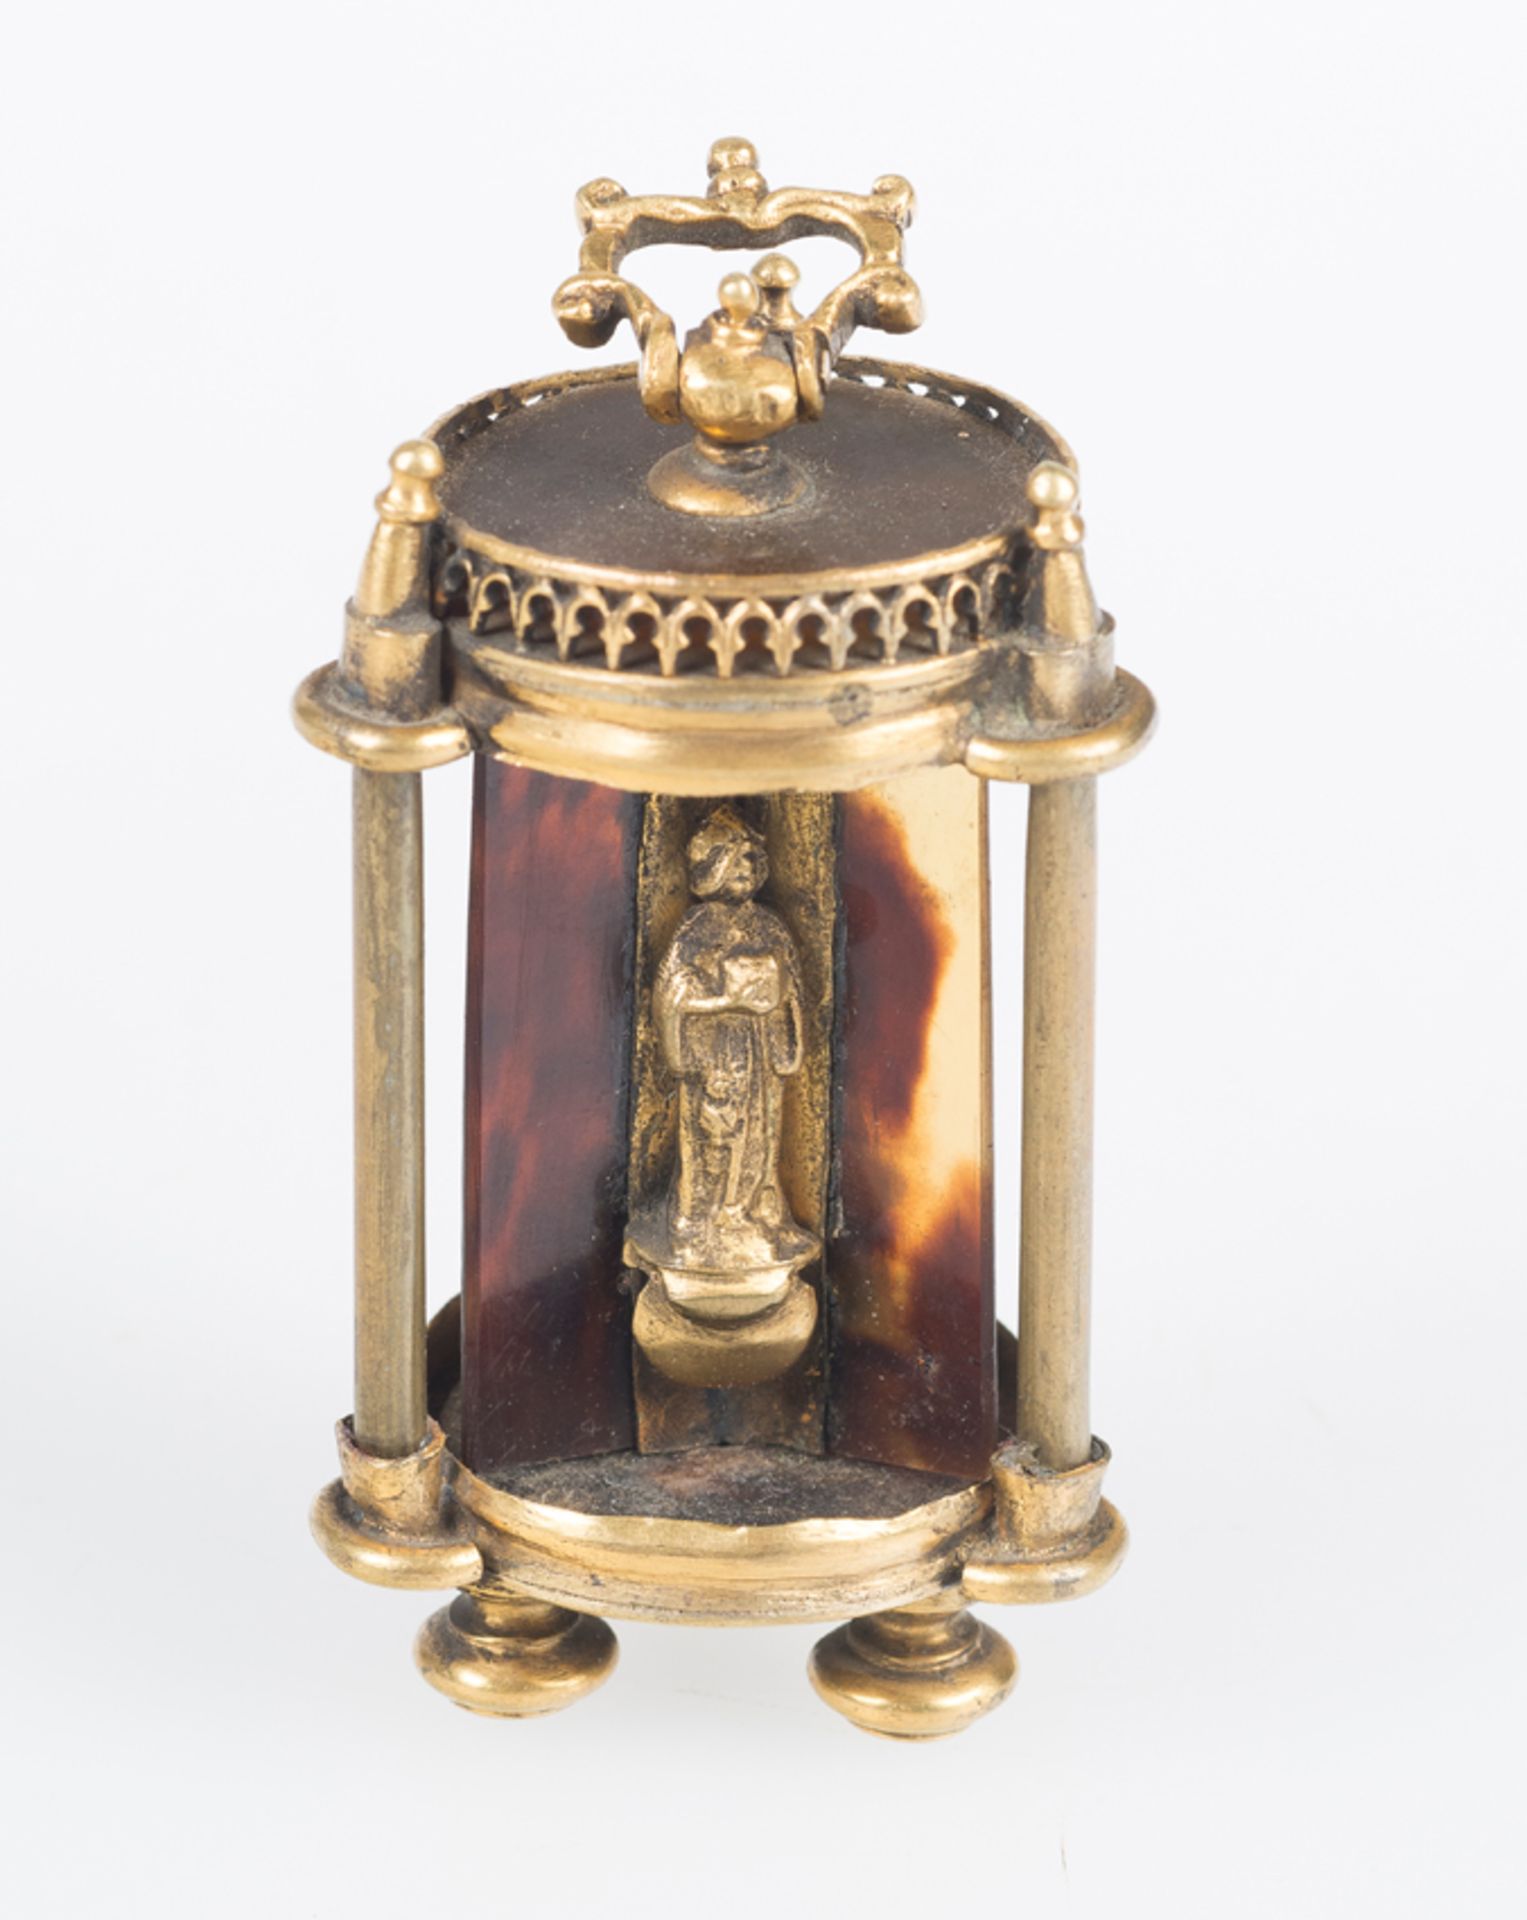 Small gilded bronze and tortoiseshell shrine pendant. Spain or Italy. 16th century. - Image 6 of 6